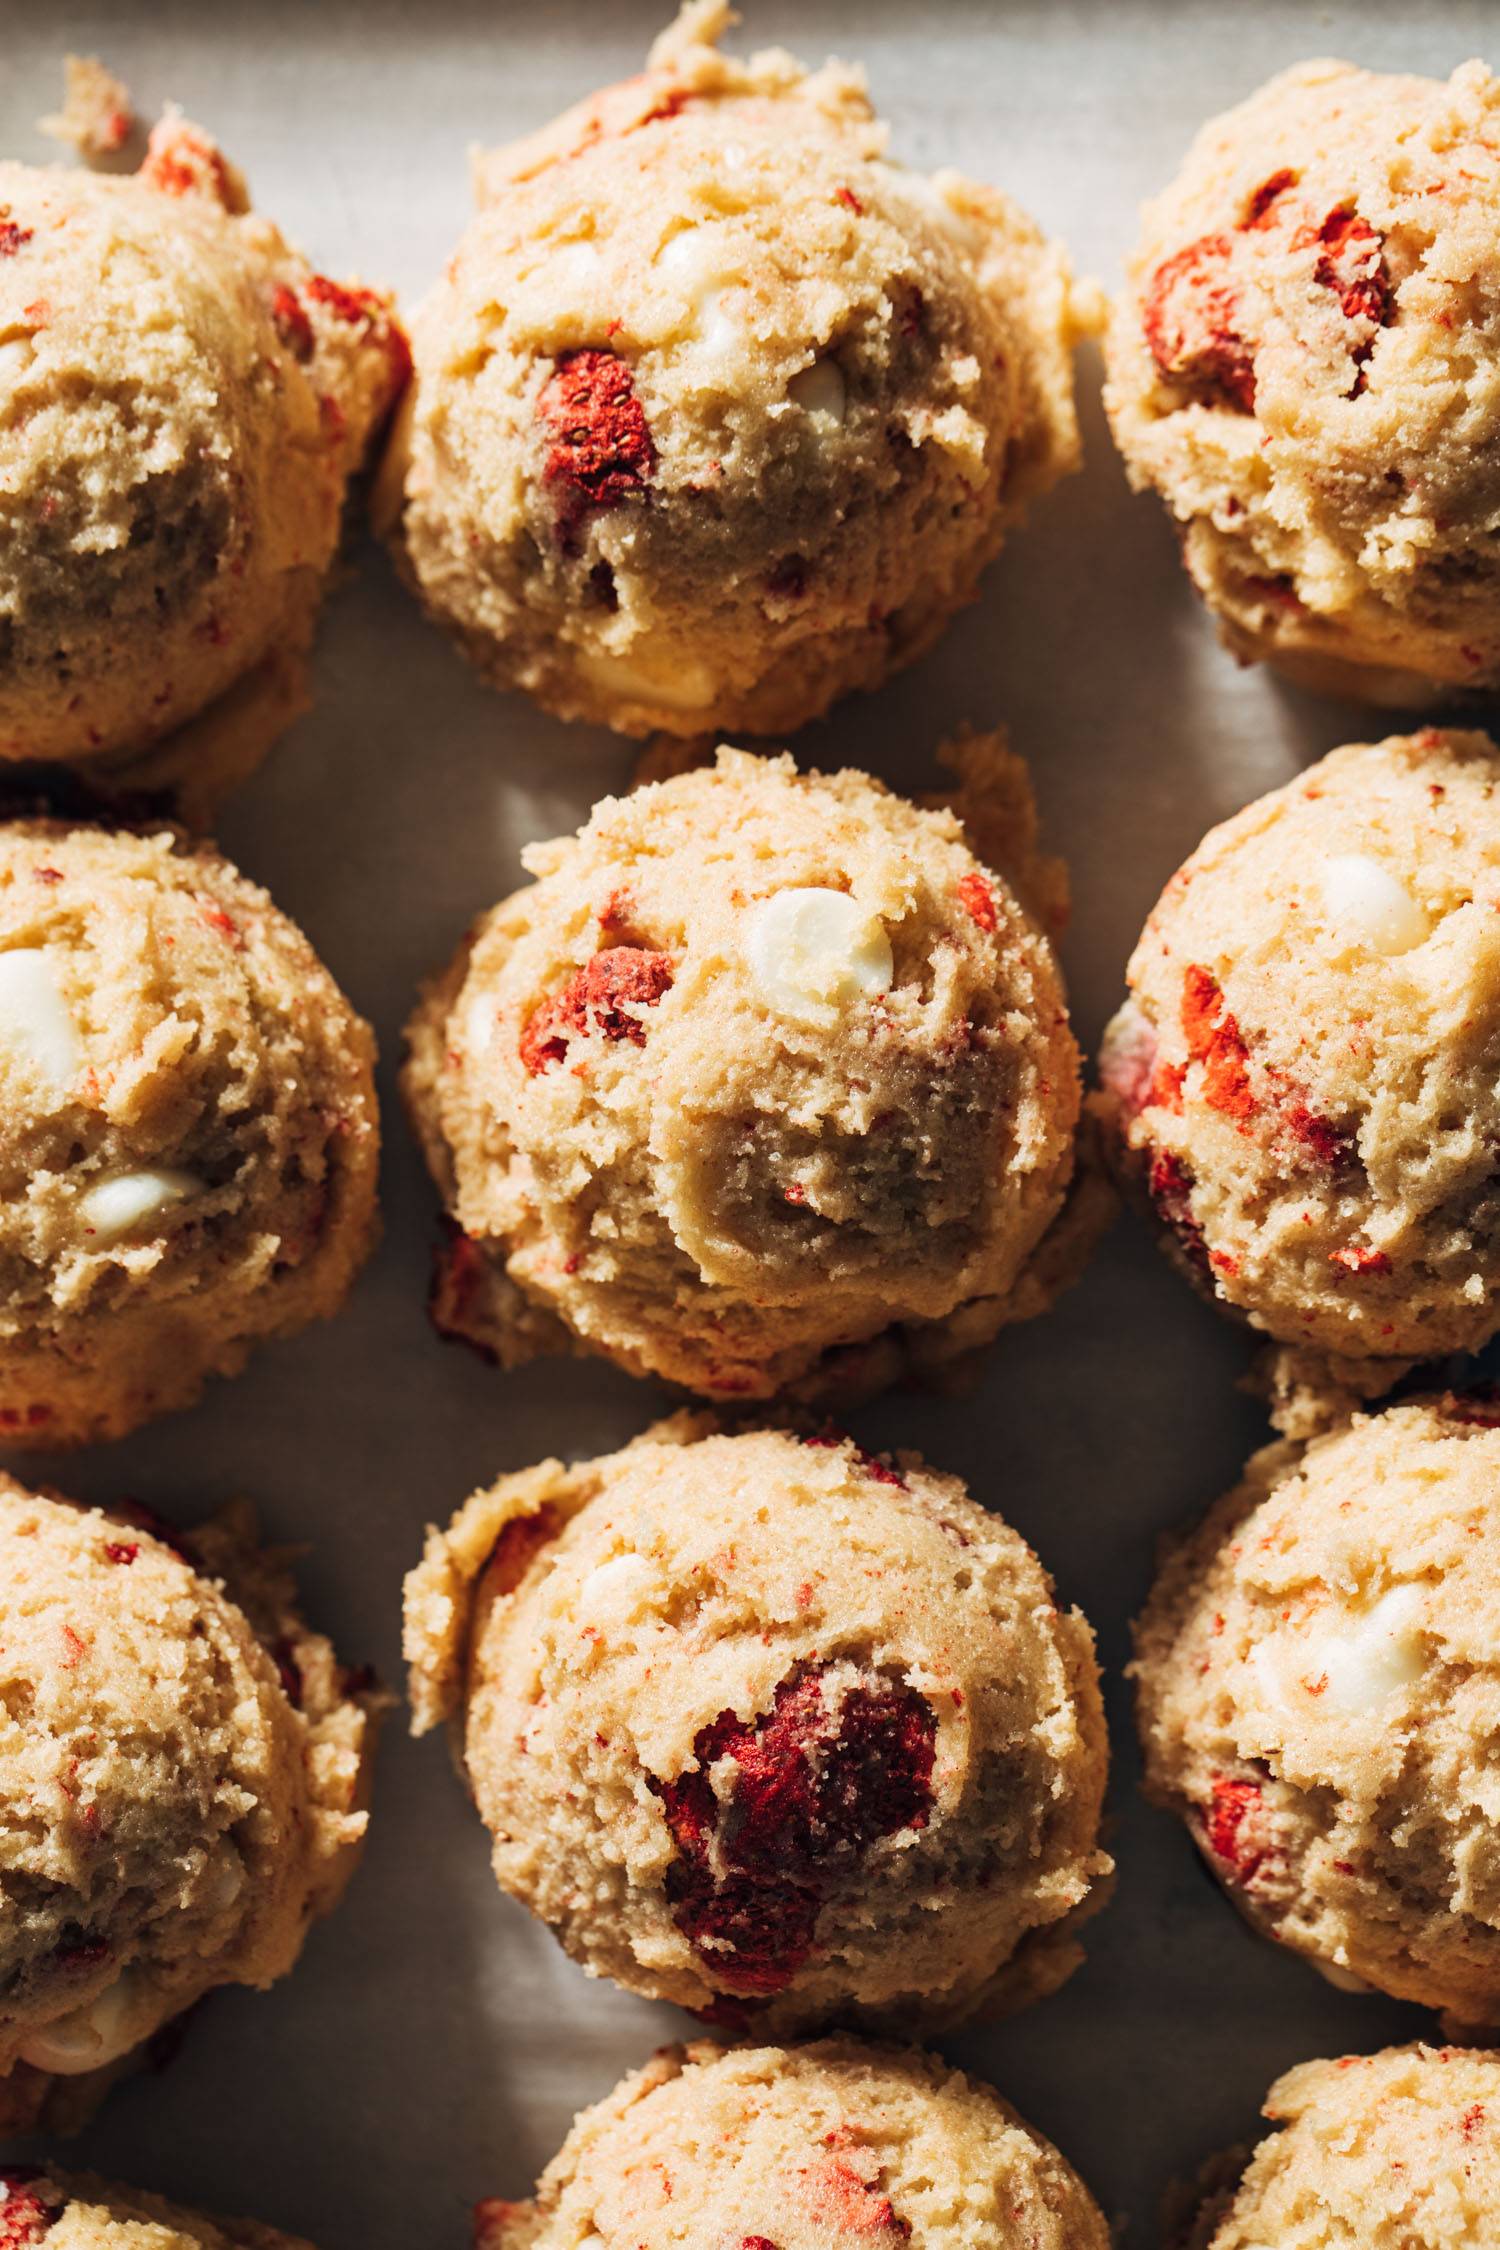 Strawberry white chocolate cookie dough rolled into balls on a sheet pan